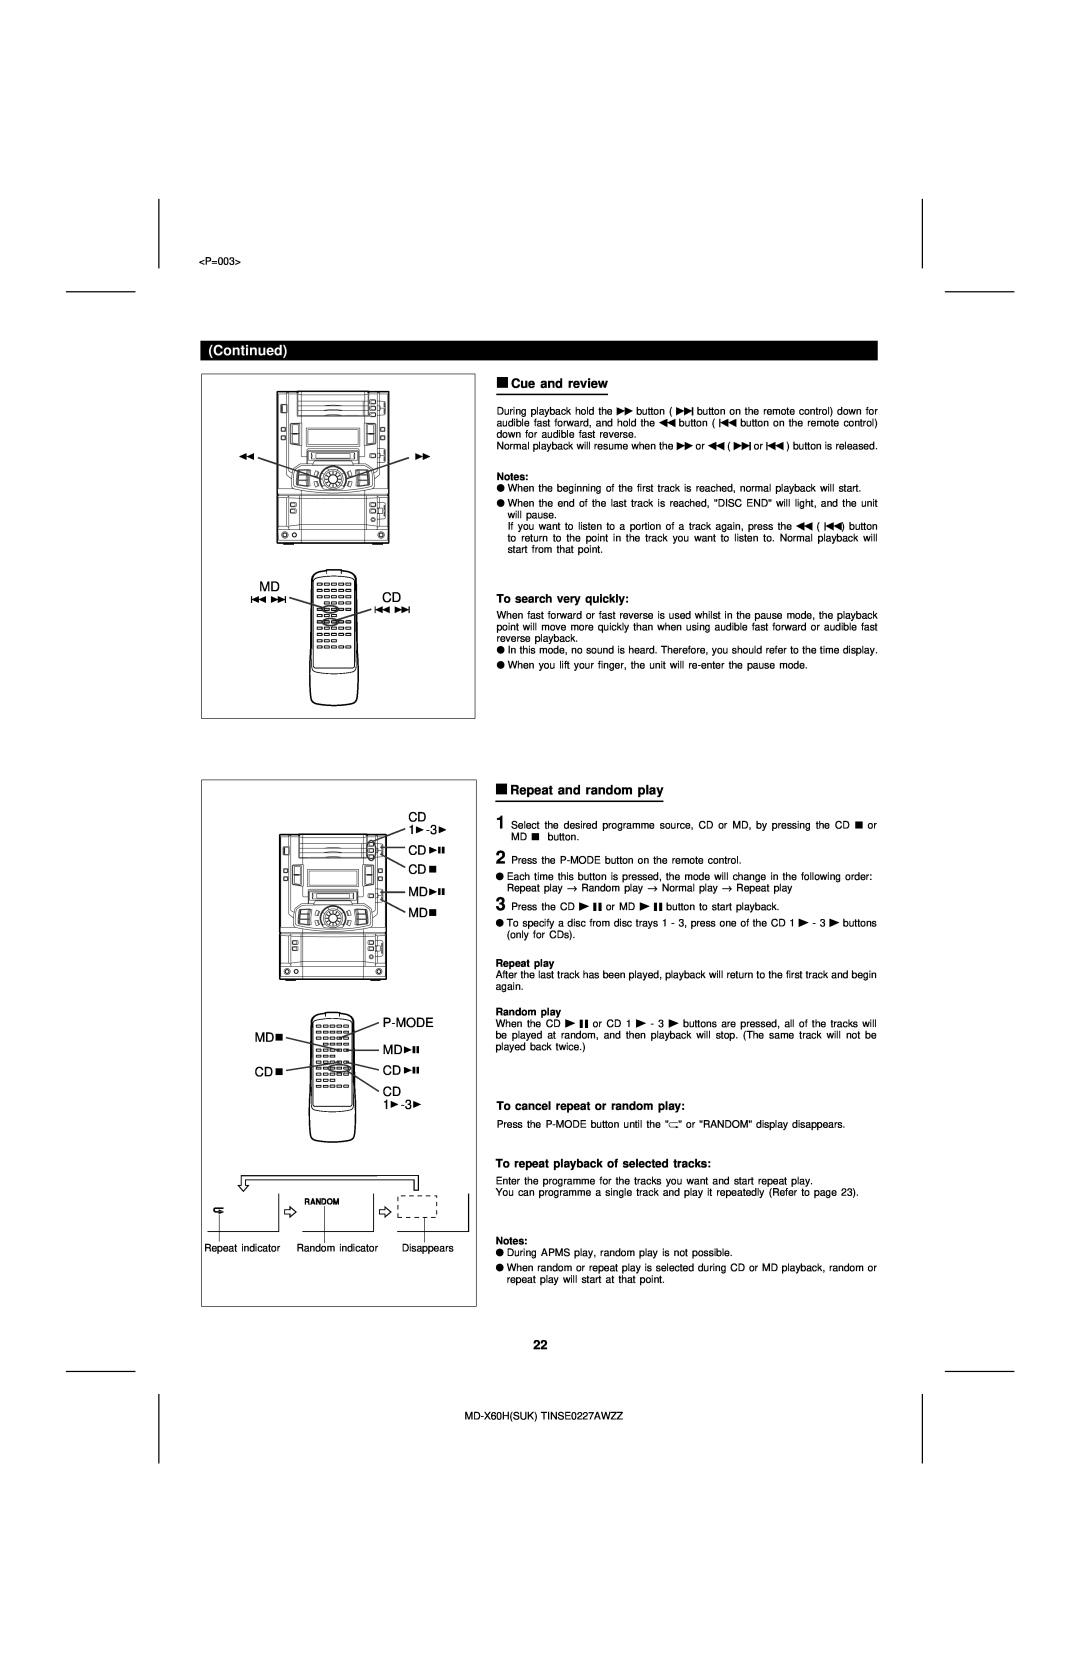 Sharp MD-X60H operation manual Md Cd, Cue and review, Repeat and random play, Continued 